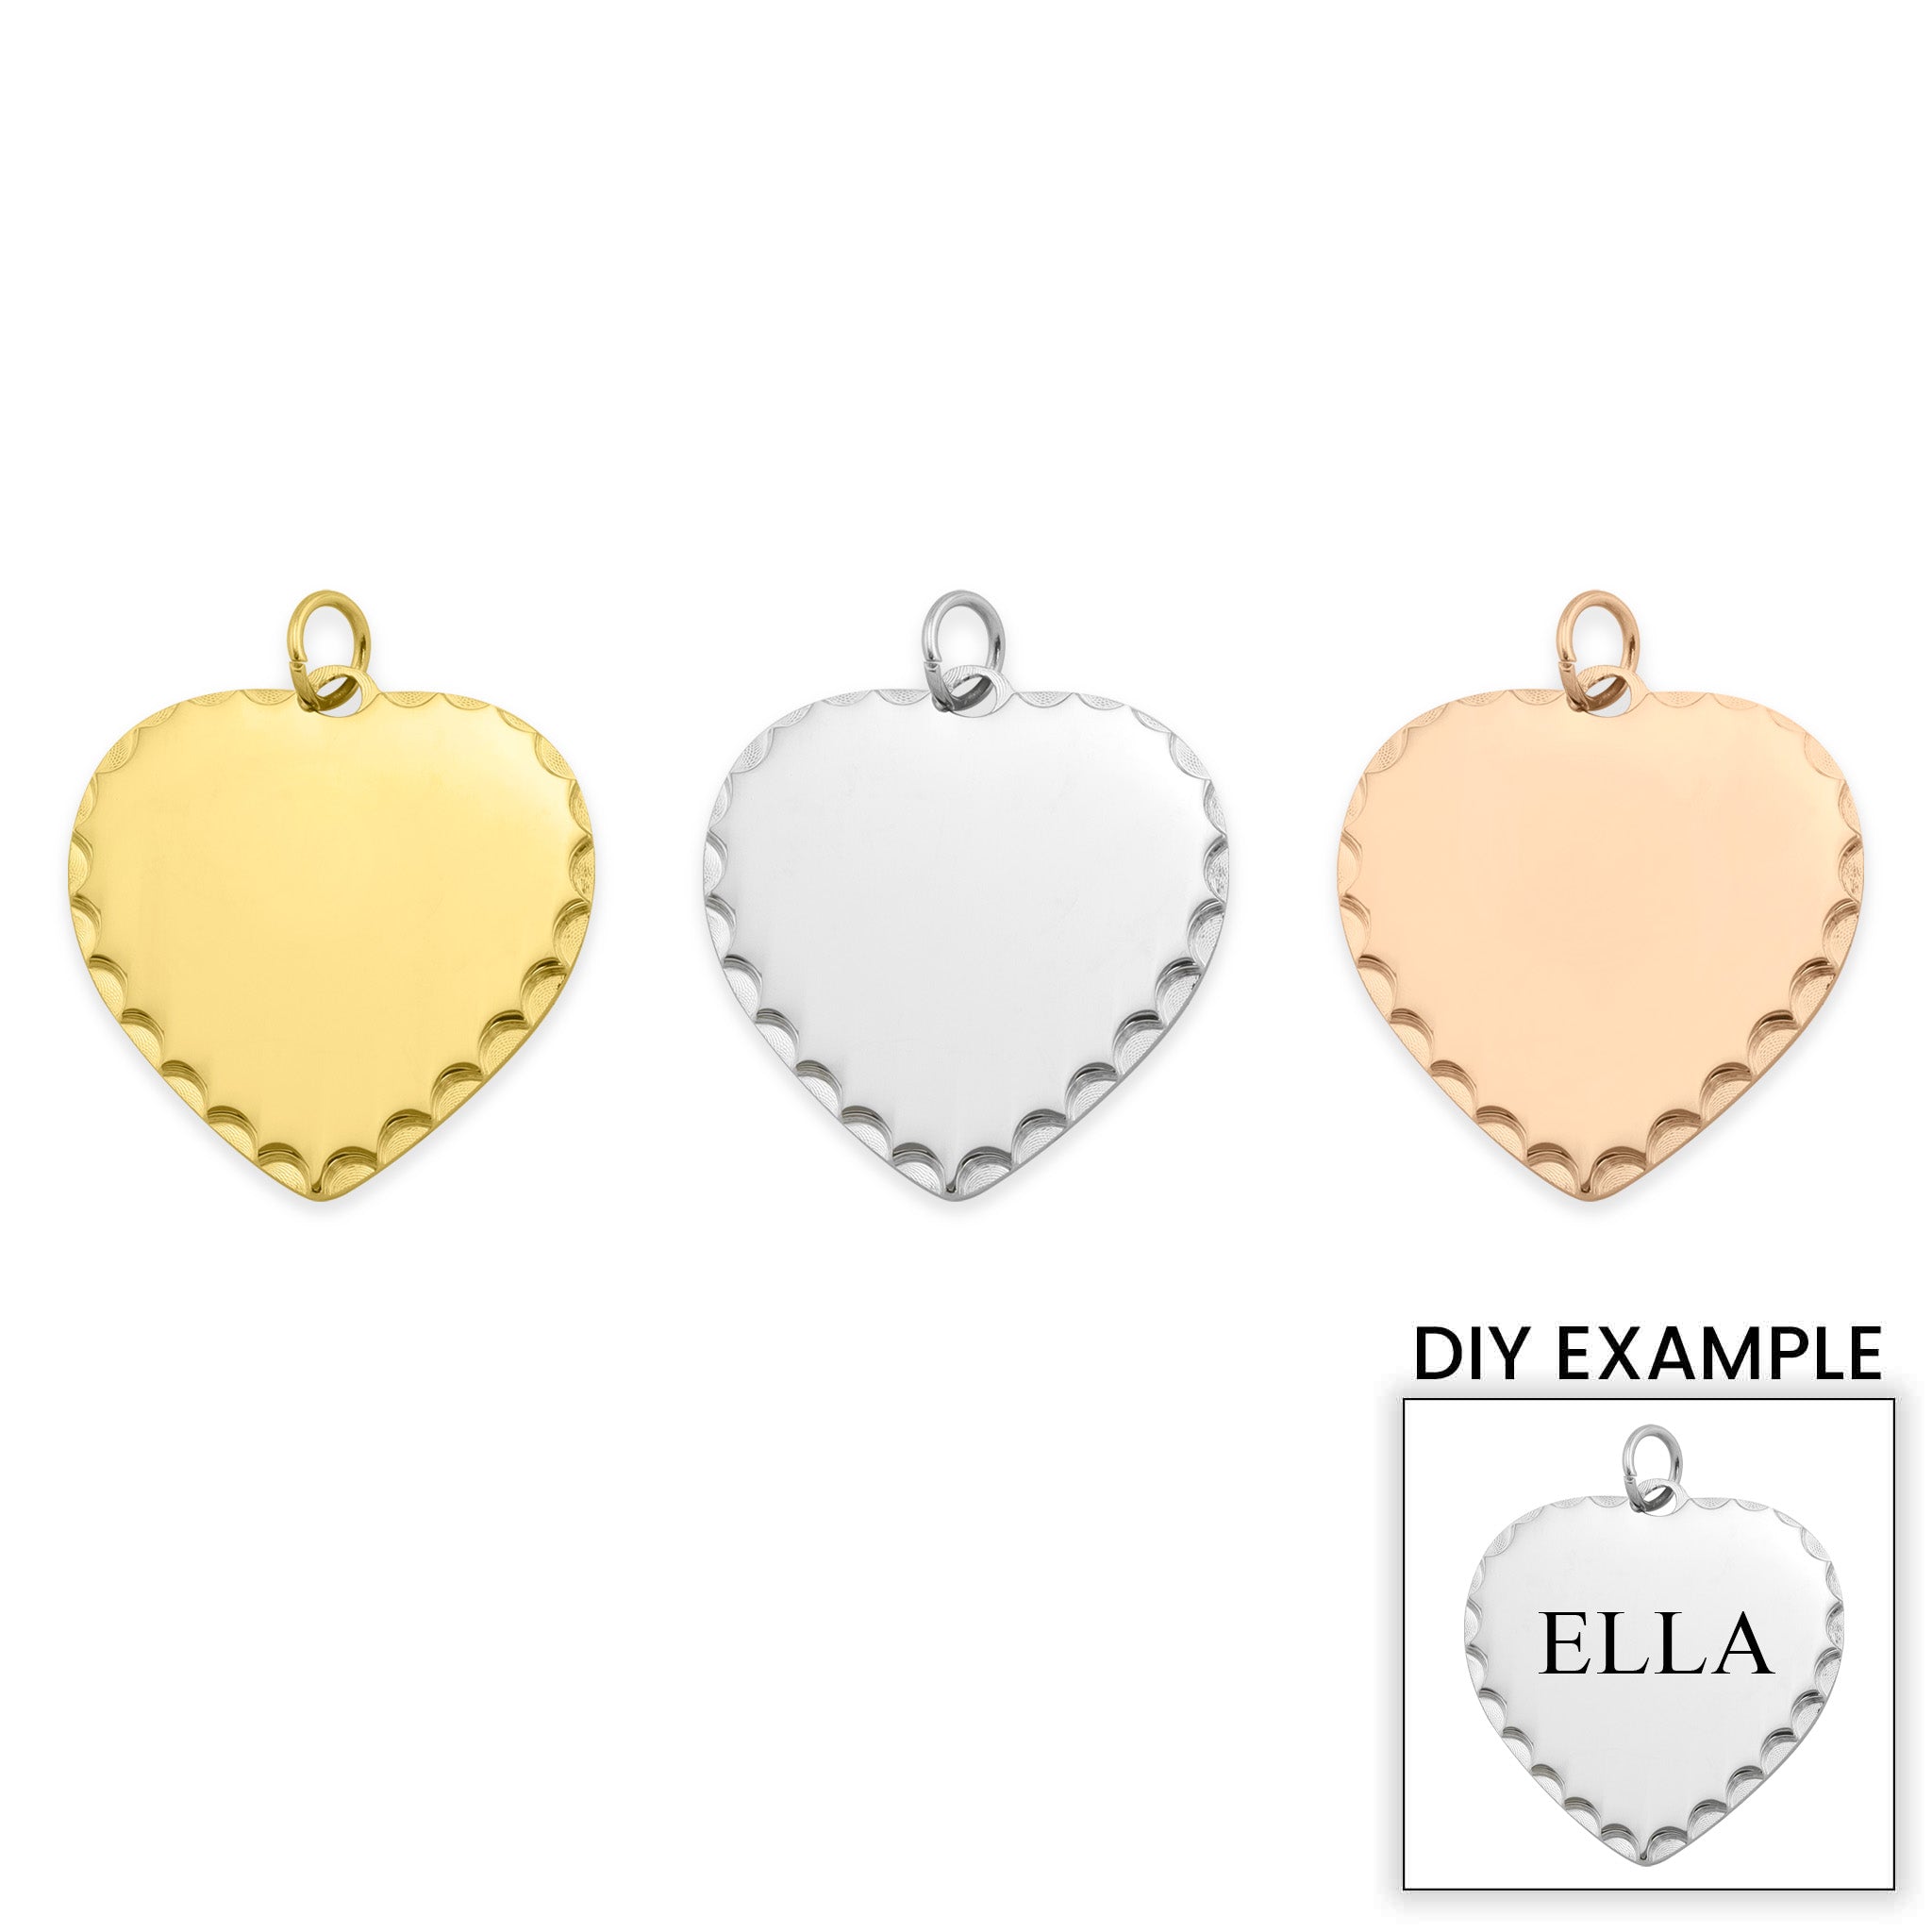 Scalloped Edge Blank PVD Coated Stainless Steel Heart Pendant / SBB0051